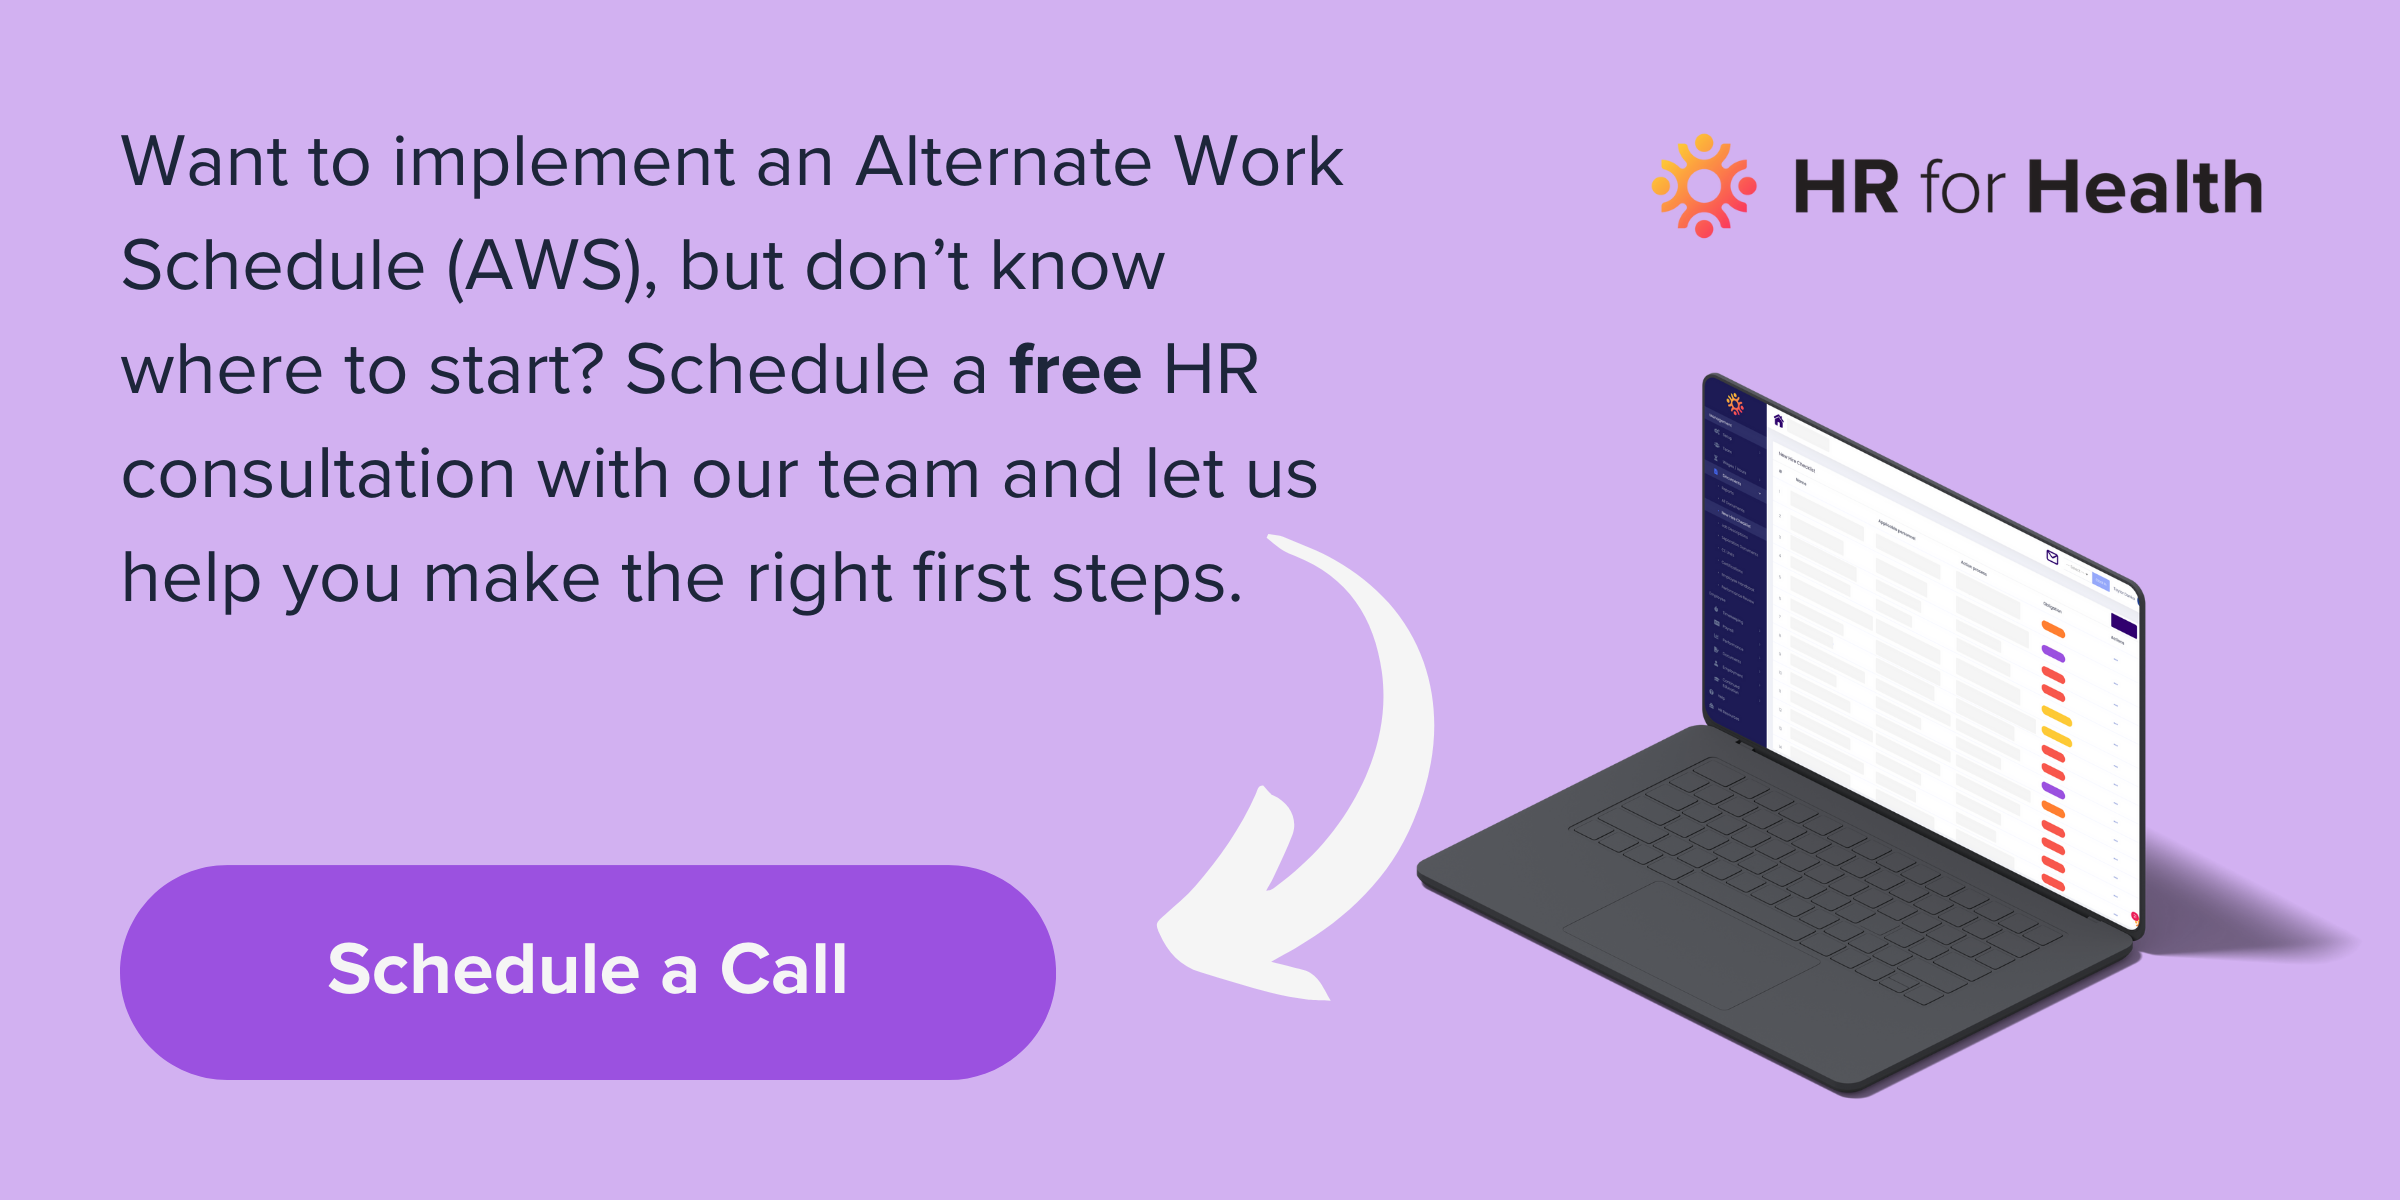 Want to implement an Alternate Work Schedule (AWS), but don’t know where to start Schedule a free HR consultation with our team and let us help you make the right first steps.